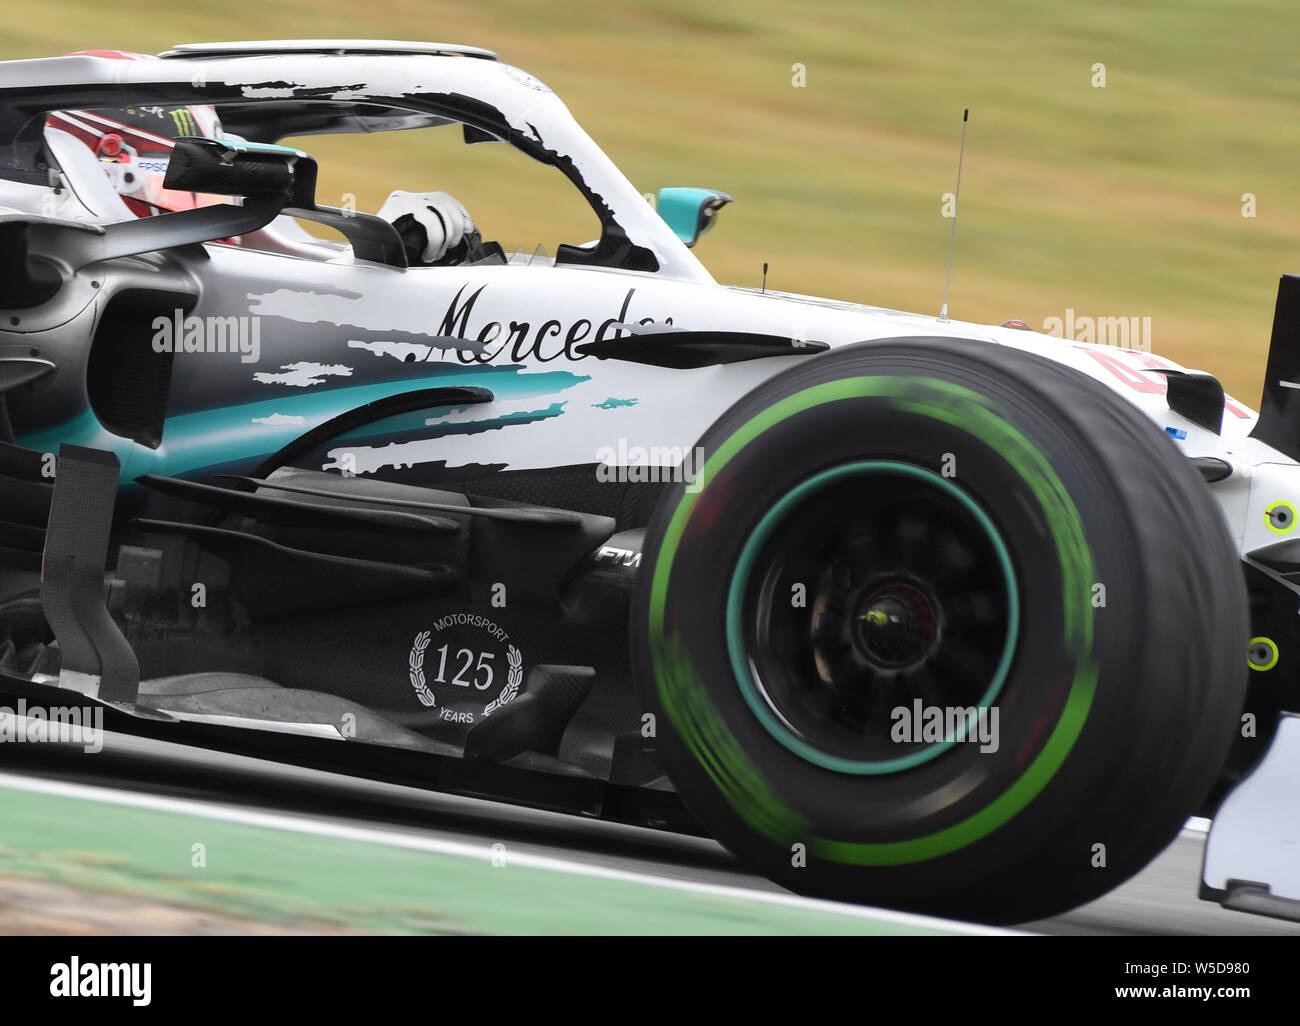 Hockenheim, Germany. 28th July, 2019. Motorsport: Formula 1 World Championship, Grand Prix of Germany. Lewis Hamilton from Great Britain of the Mercedes-AMG Petronas team drives across the track. Credit: Uli Deck/dpa/Alamy Live News Stock Photo